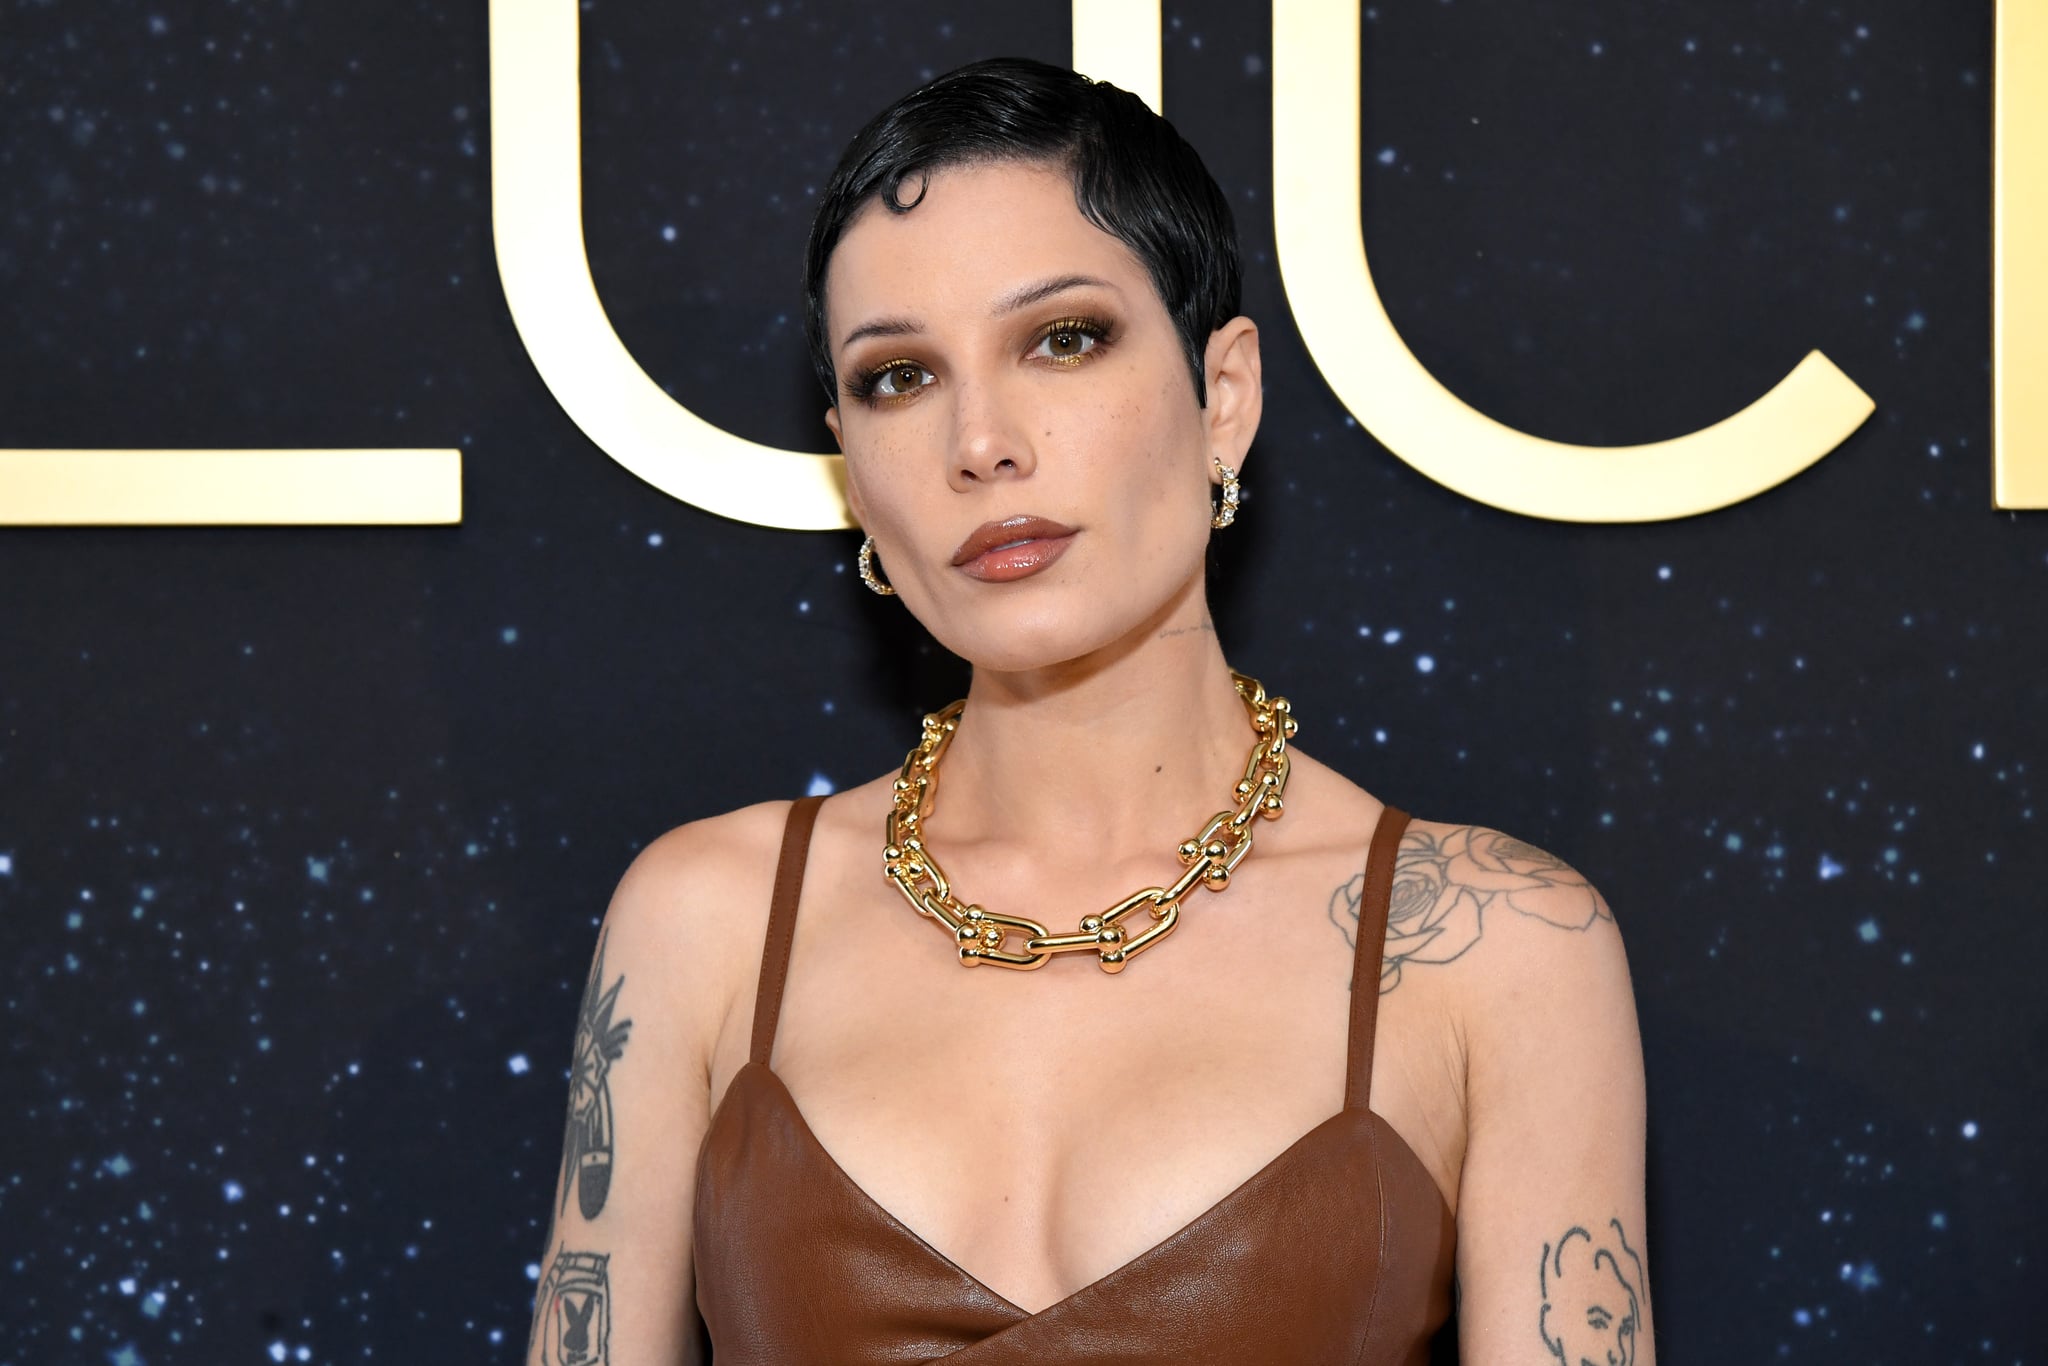 LOS ANGELES, CALIFORNIA - OCTOBER 26: Halsey attends as Tiffany & Co. celebrates the launch of the Lock Collection at Sunset Tower Hotel on October 26, 2022 in Los Angeles, California. (Photo by Jon Kopaloff/Getty Images for Tiffany & Co.)